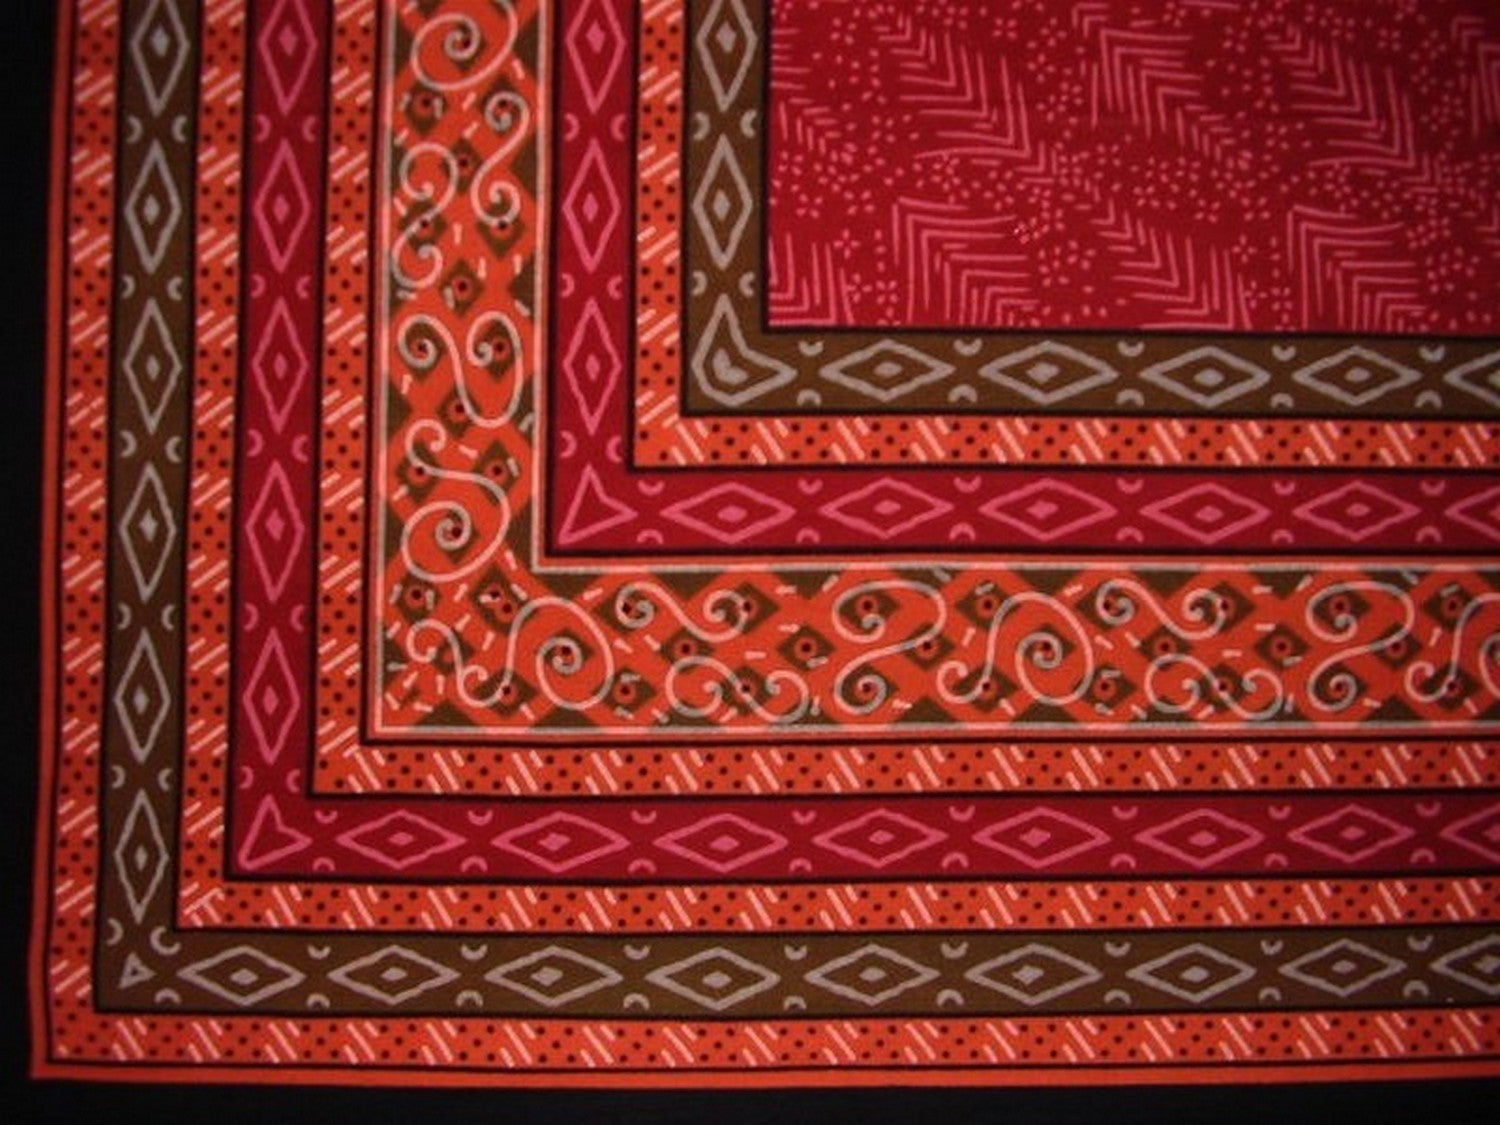 Calico Print Cotton Tablecloth 90" x 60" Red